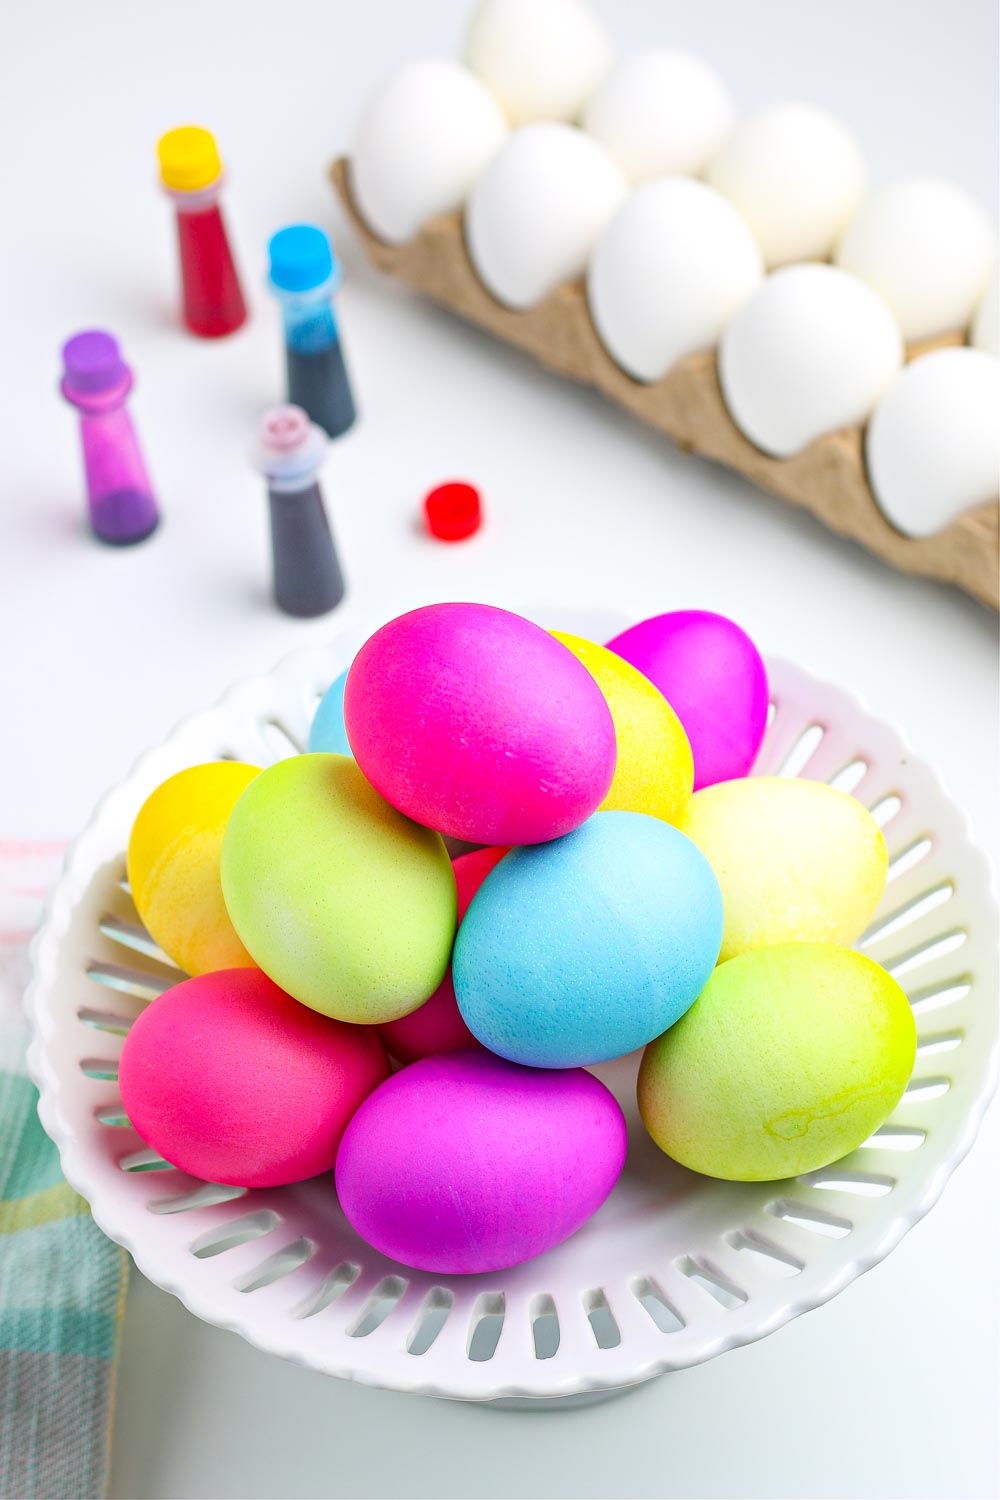 How to Dye Easter Eggs with Food Coloring • Food Folks and Fun